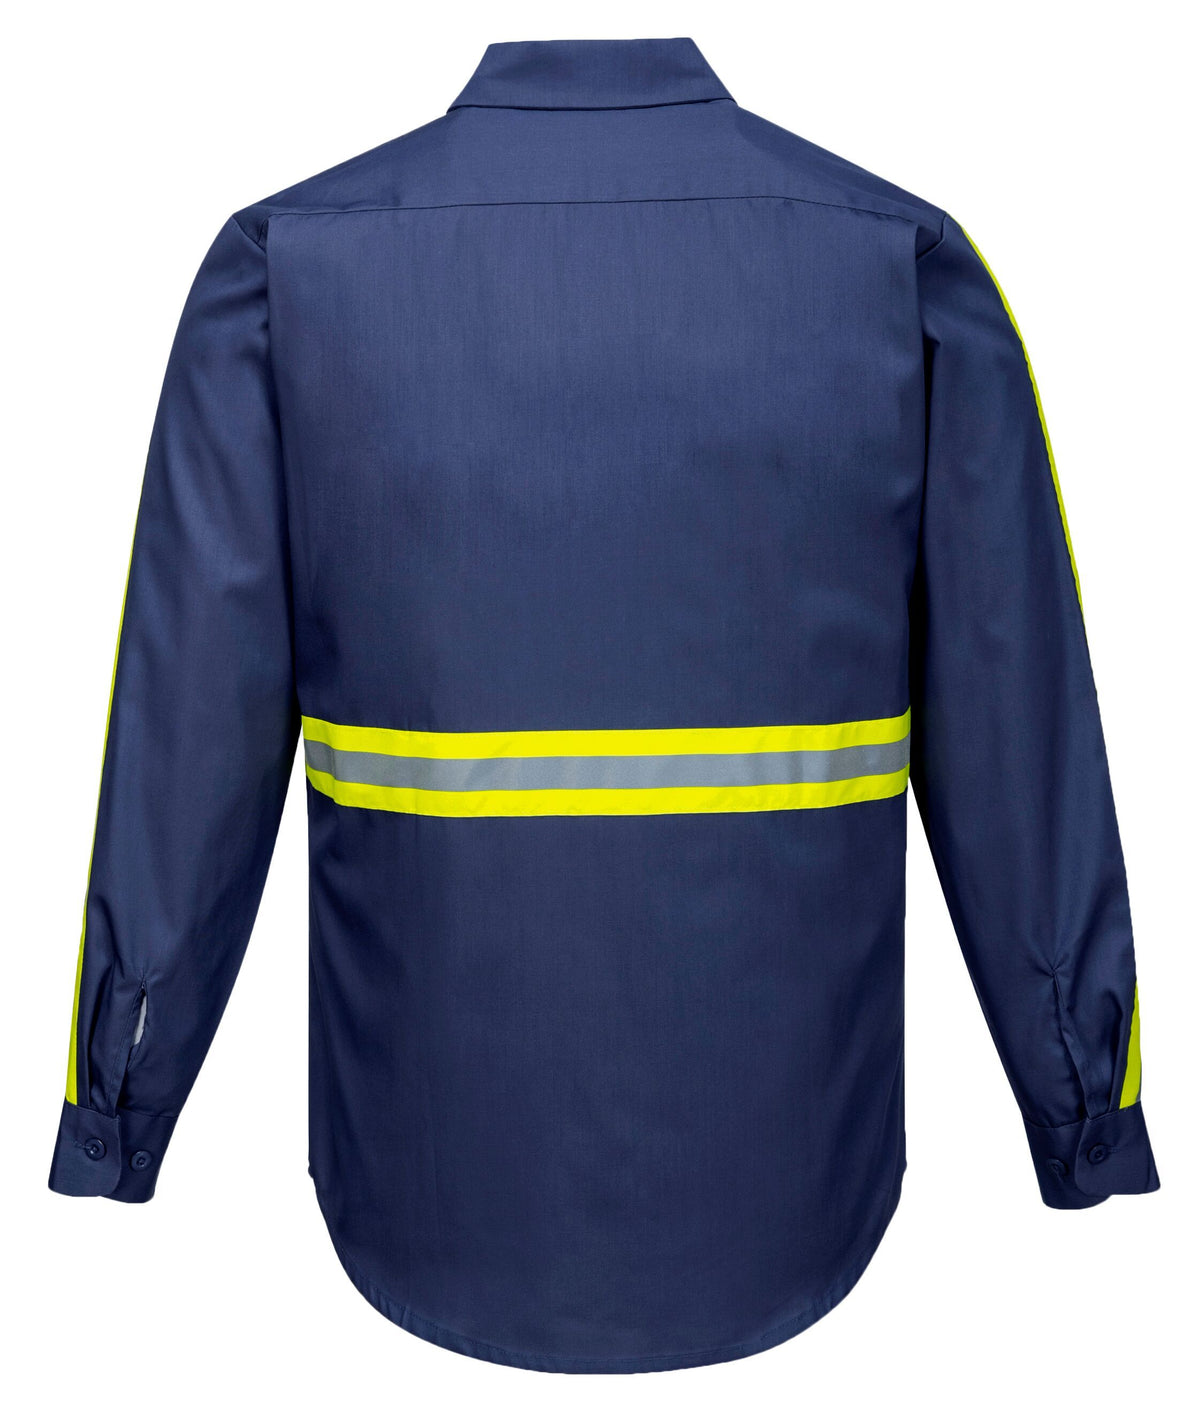 Firstahl Iona Xtra Shirt, Long Sleeve - Safety Shirts for Men - High Visibility